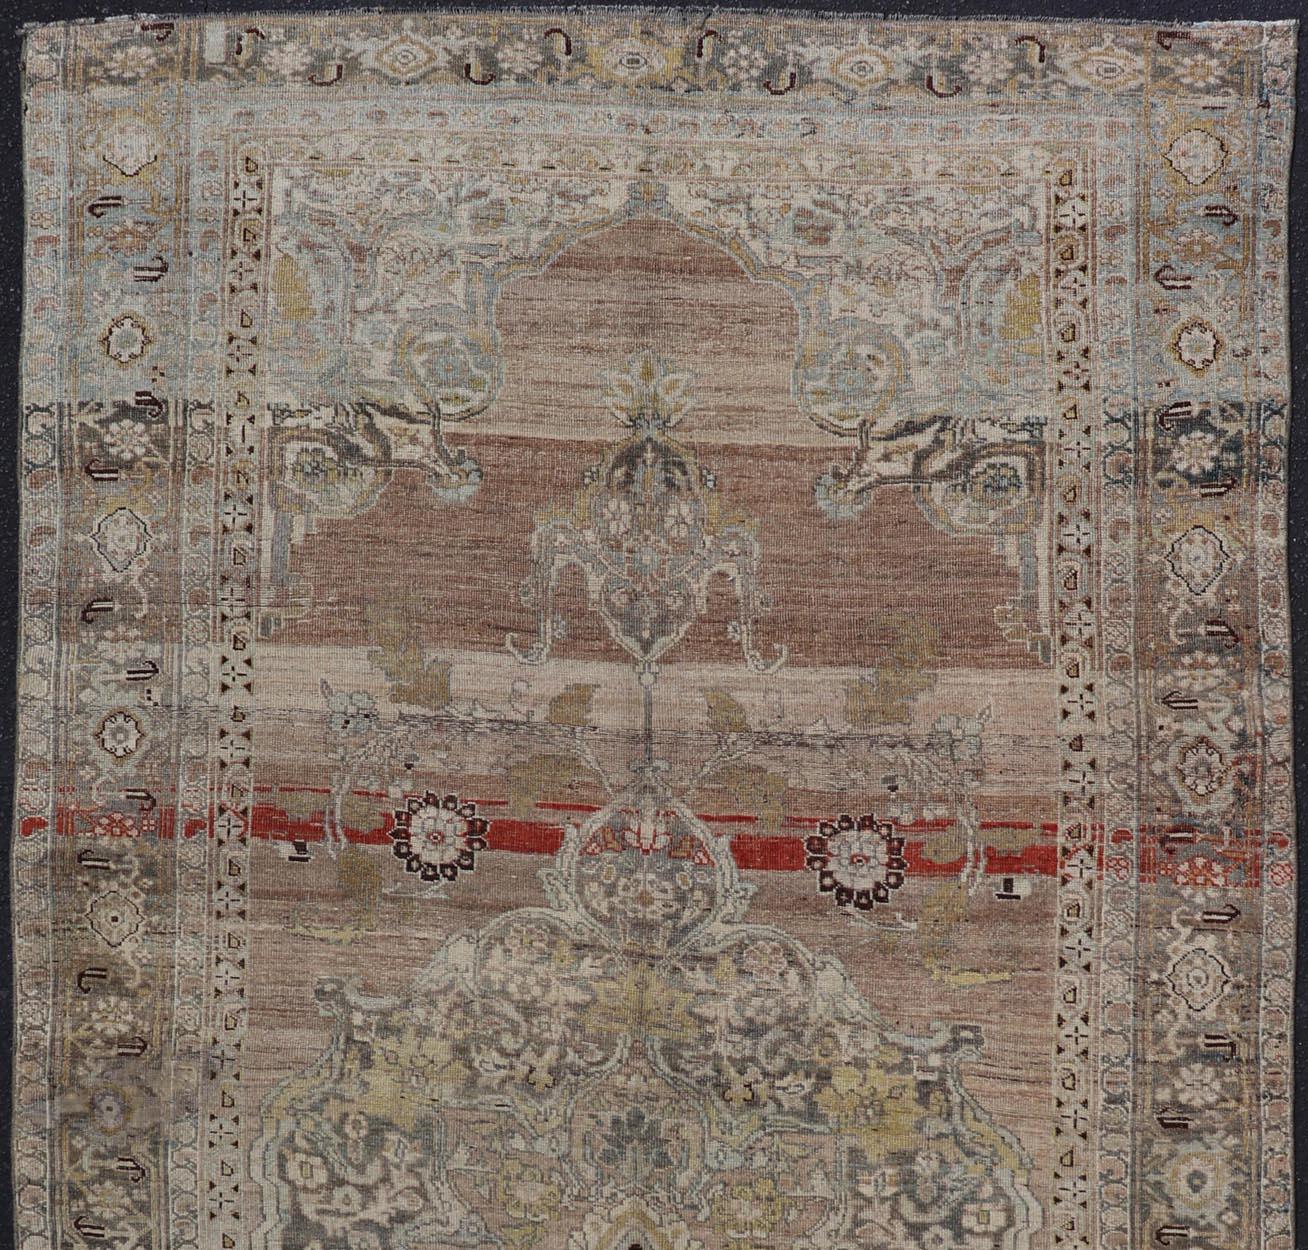 19th Century  Antique Persian Bidjar Rug with Large Floral Medallion and Vining Floral